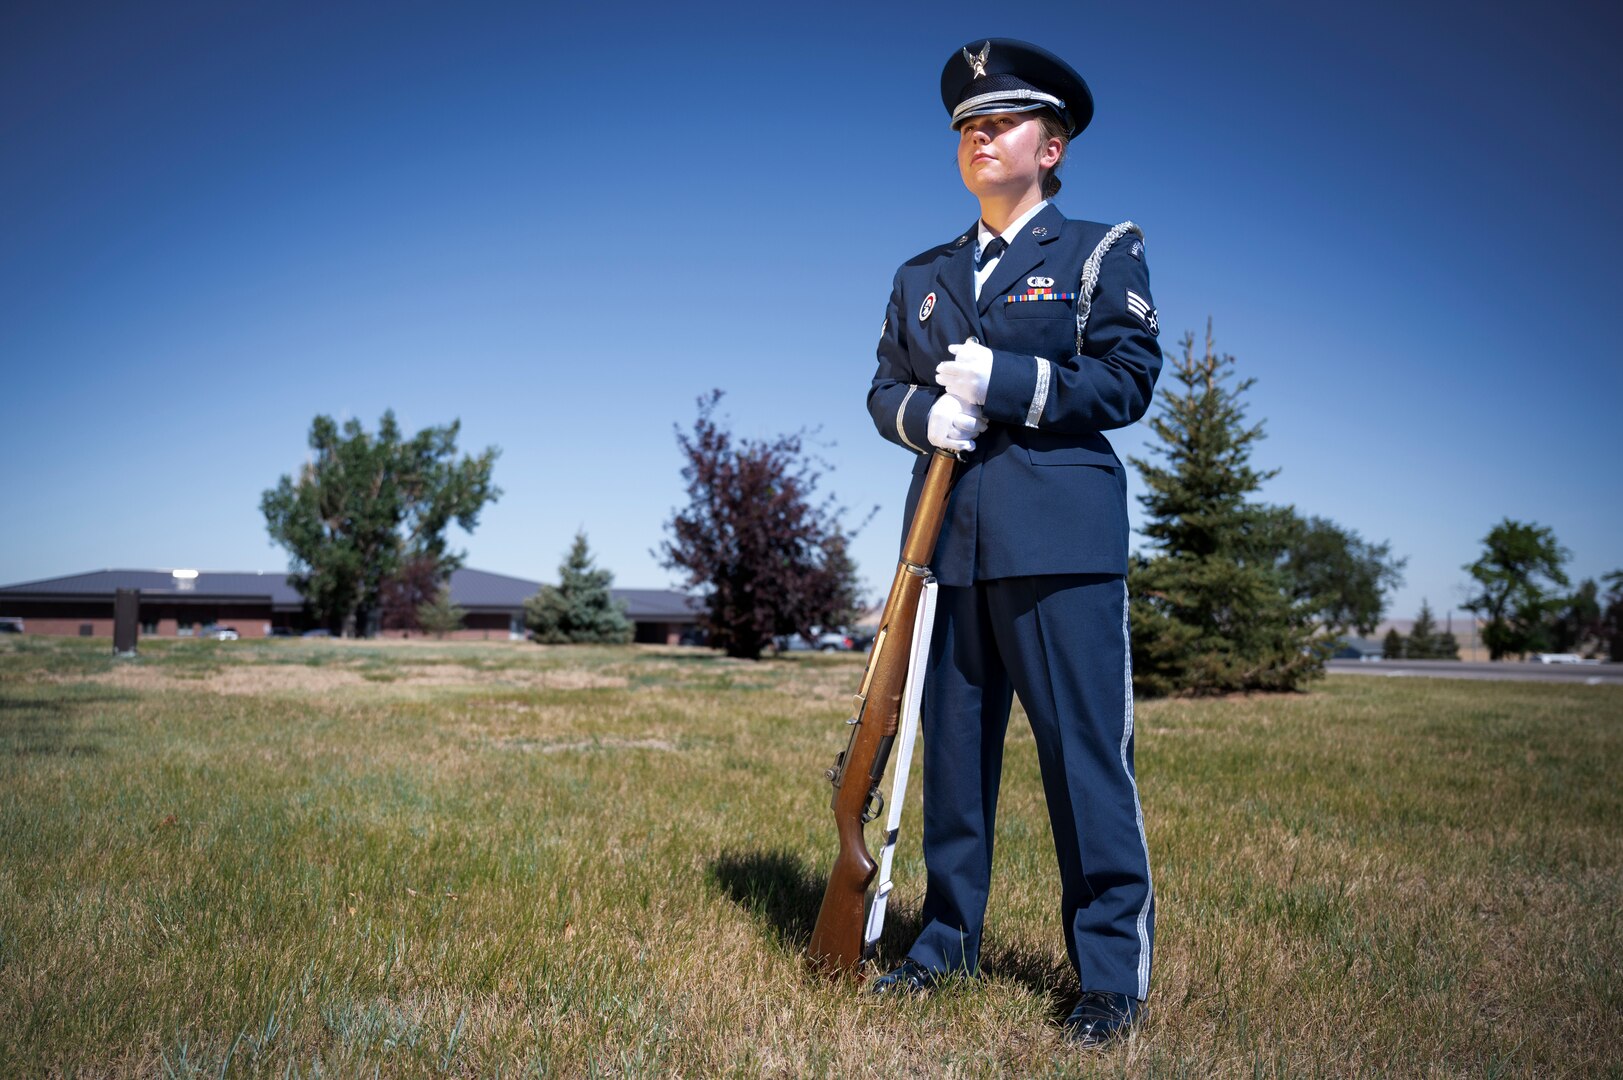 A woman in a ceremonial uniform stands with a rifle in a field of grass.